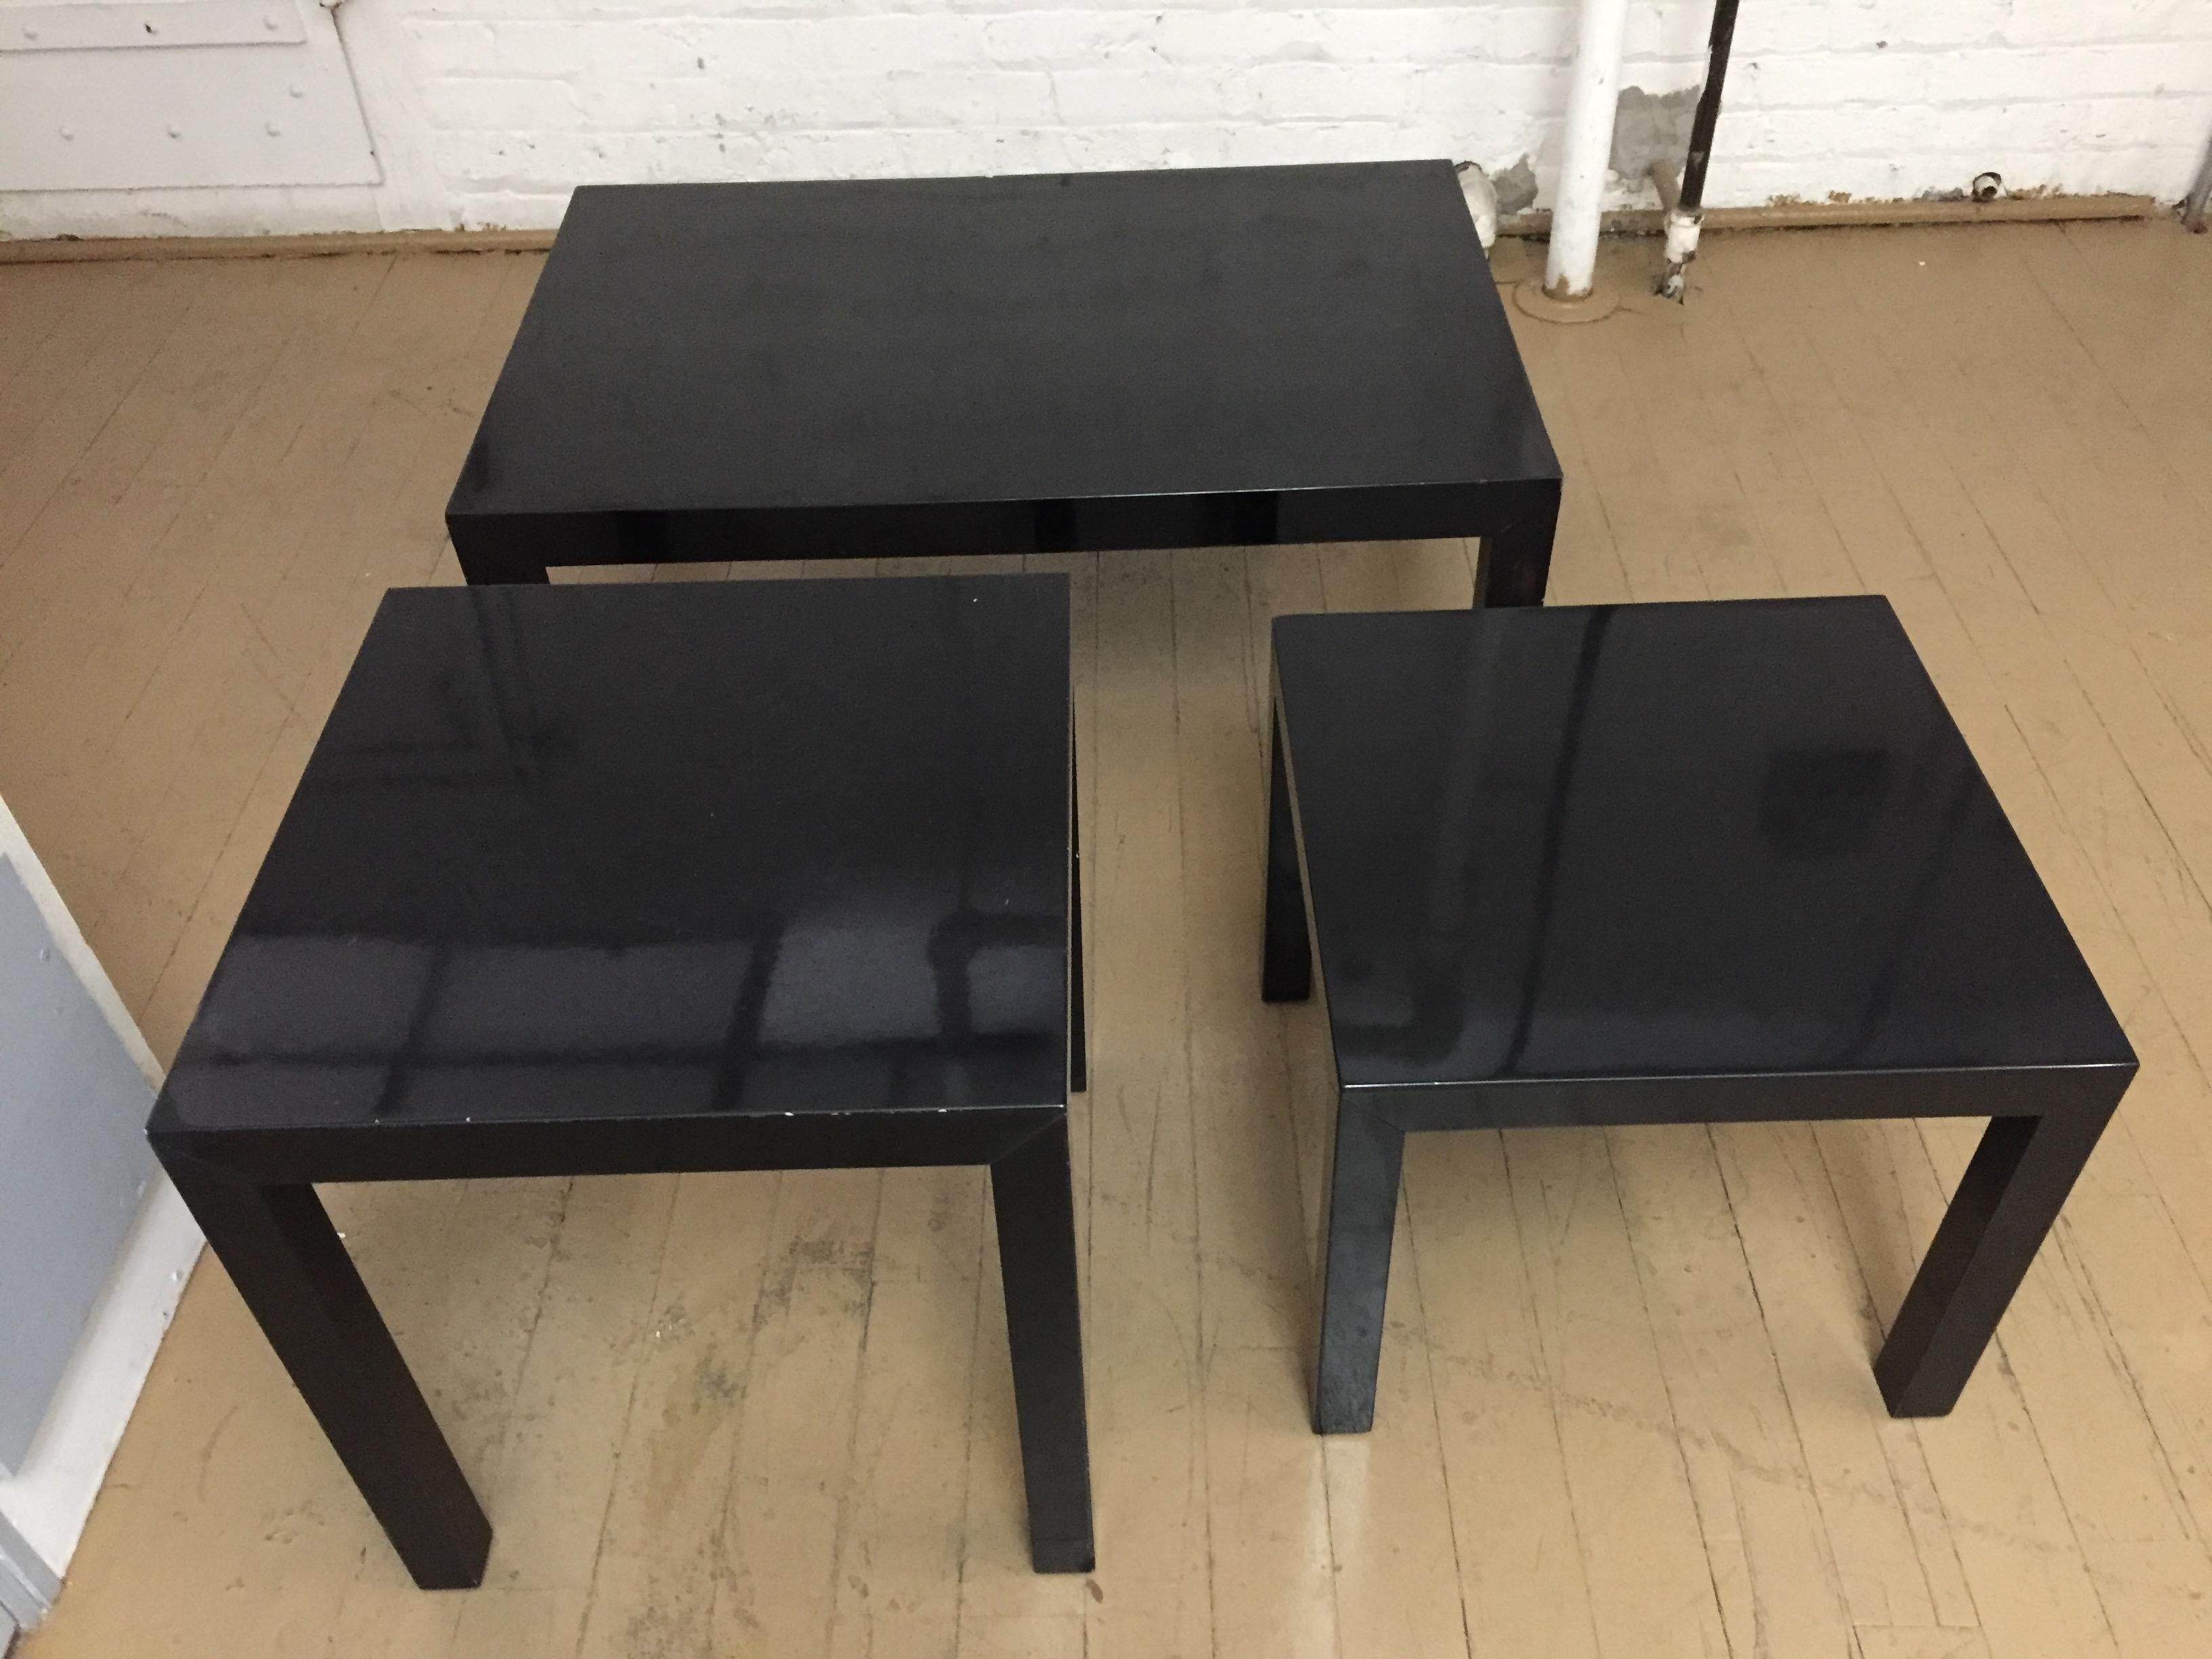 Mid-century modern black lacquer tables / set of three
Three available - and priced as a set
1970's mod at its best
Sizes these iconic 1960s black lacquer tables are from our childhood home
They were used every where - and added function as well as